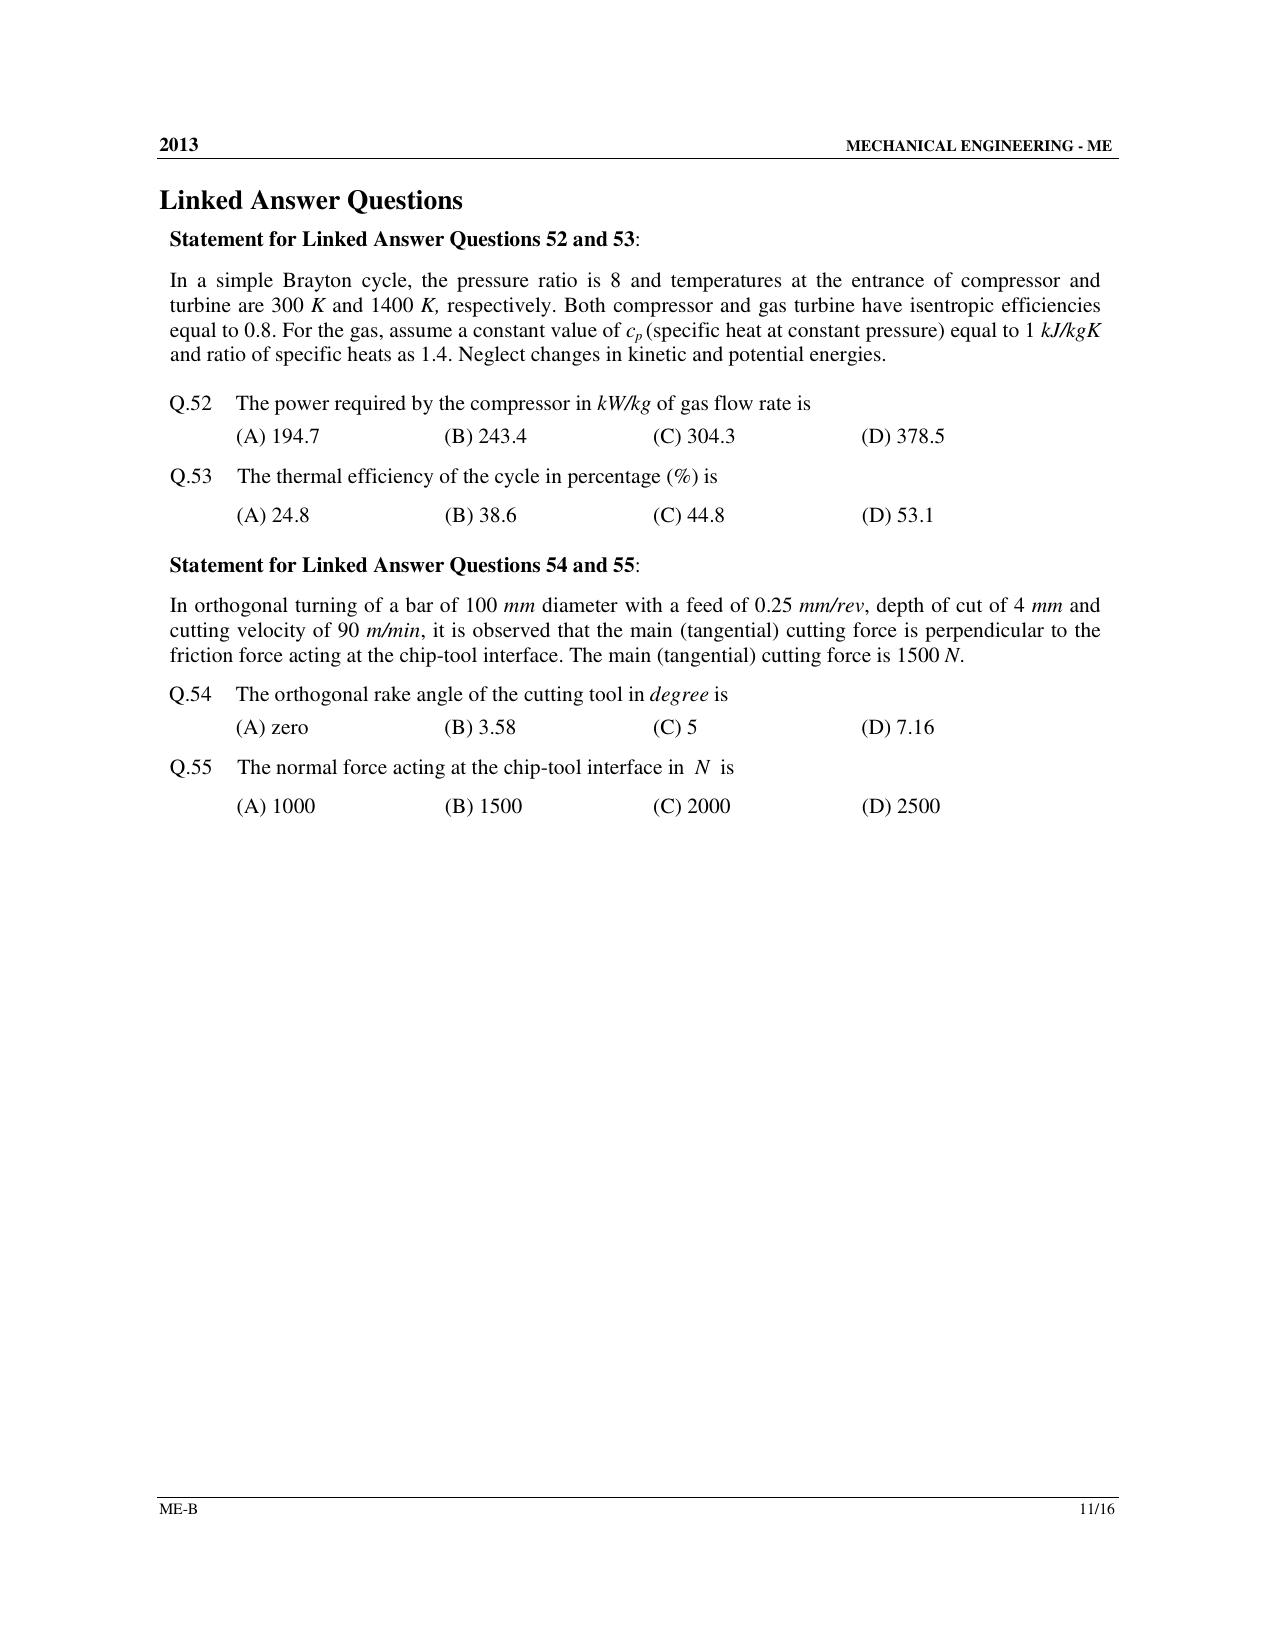 GATE 2013 Mechanical Engineering (ME) Question Paper with Answer Key - Page 26